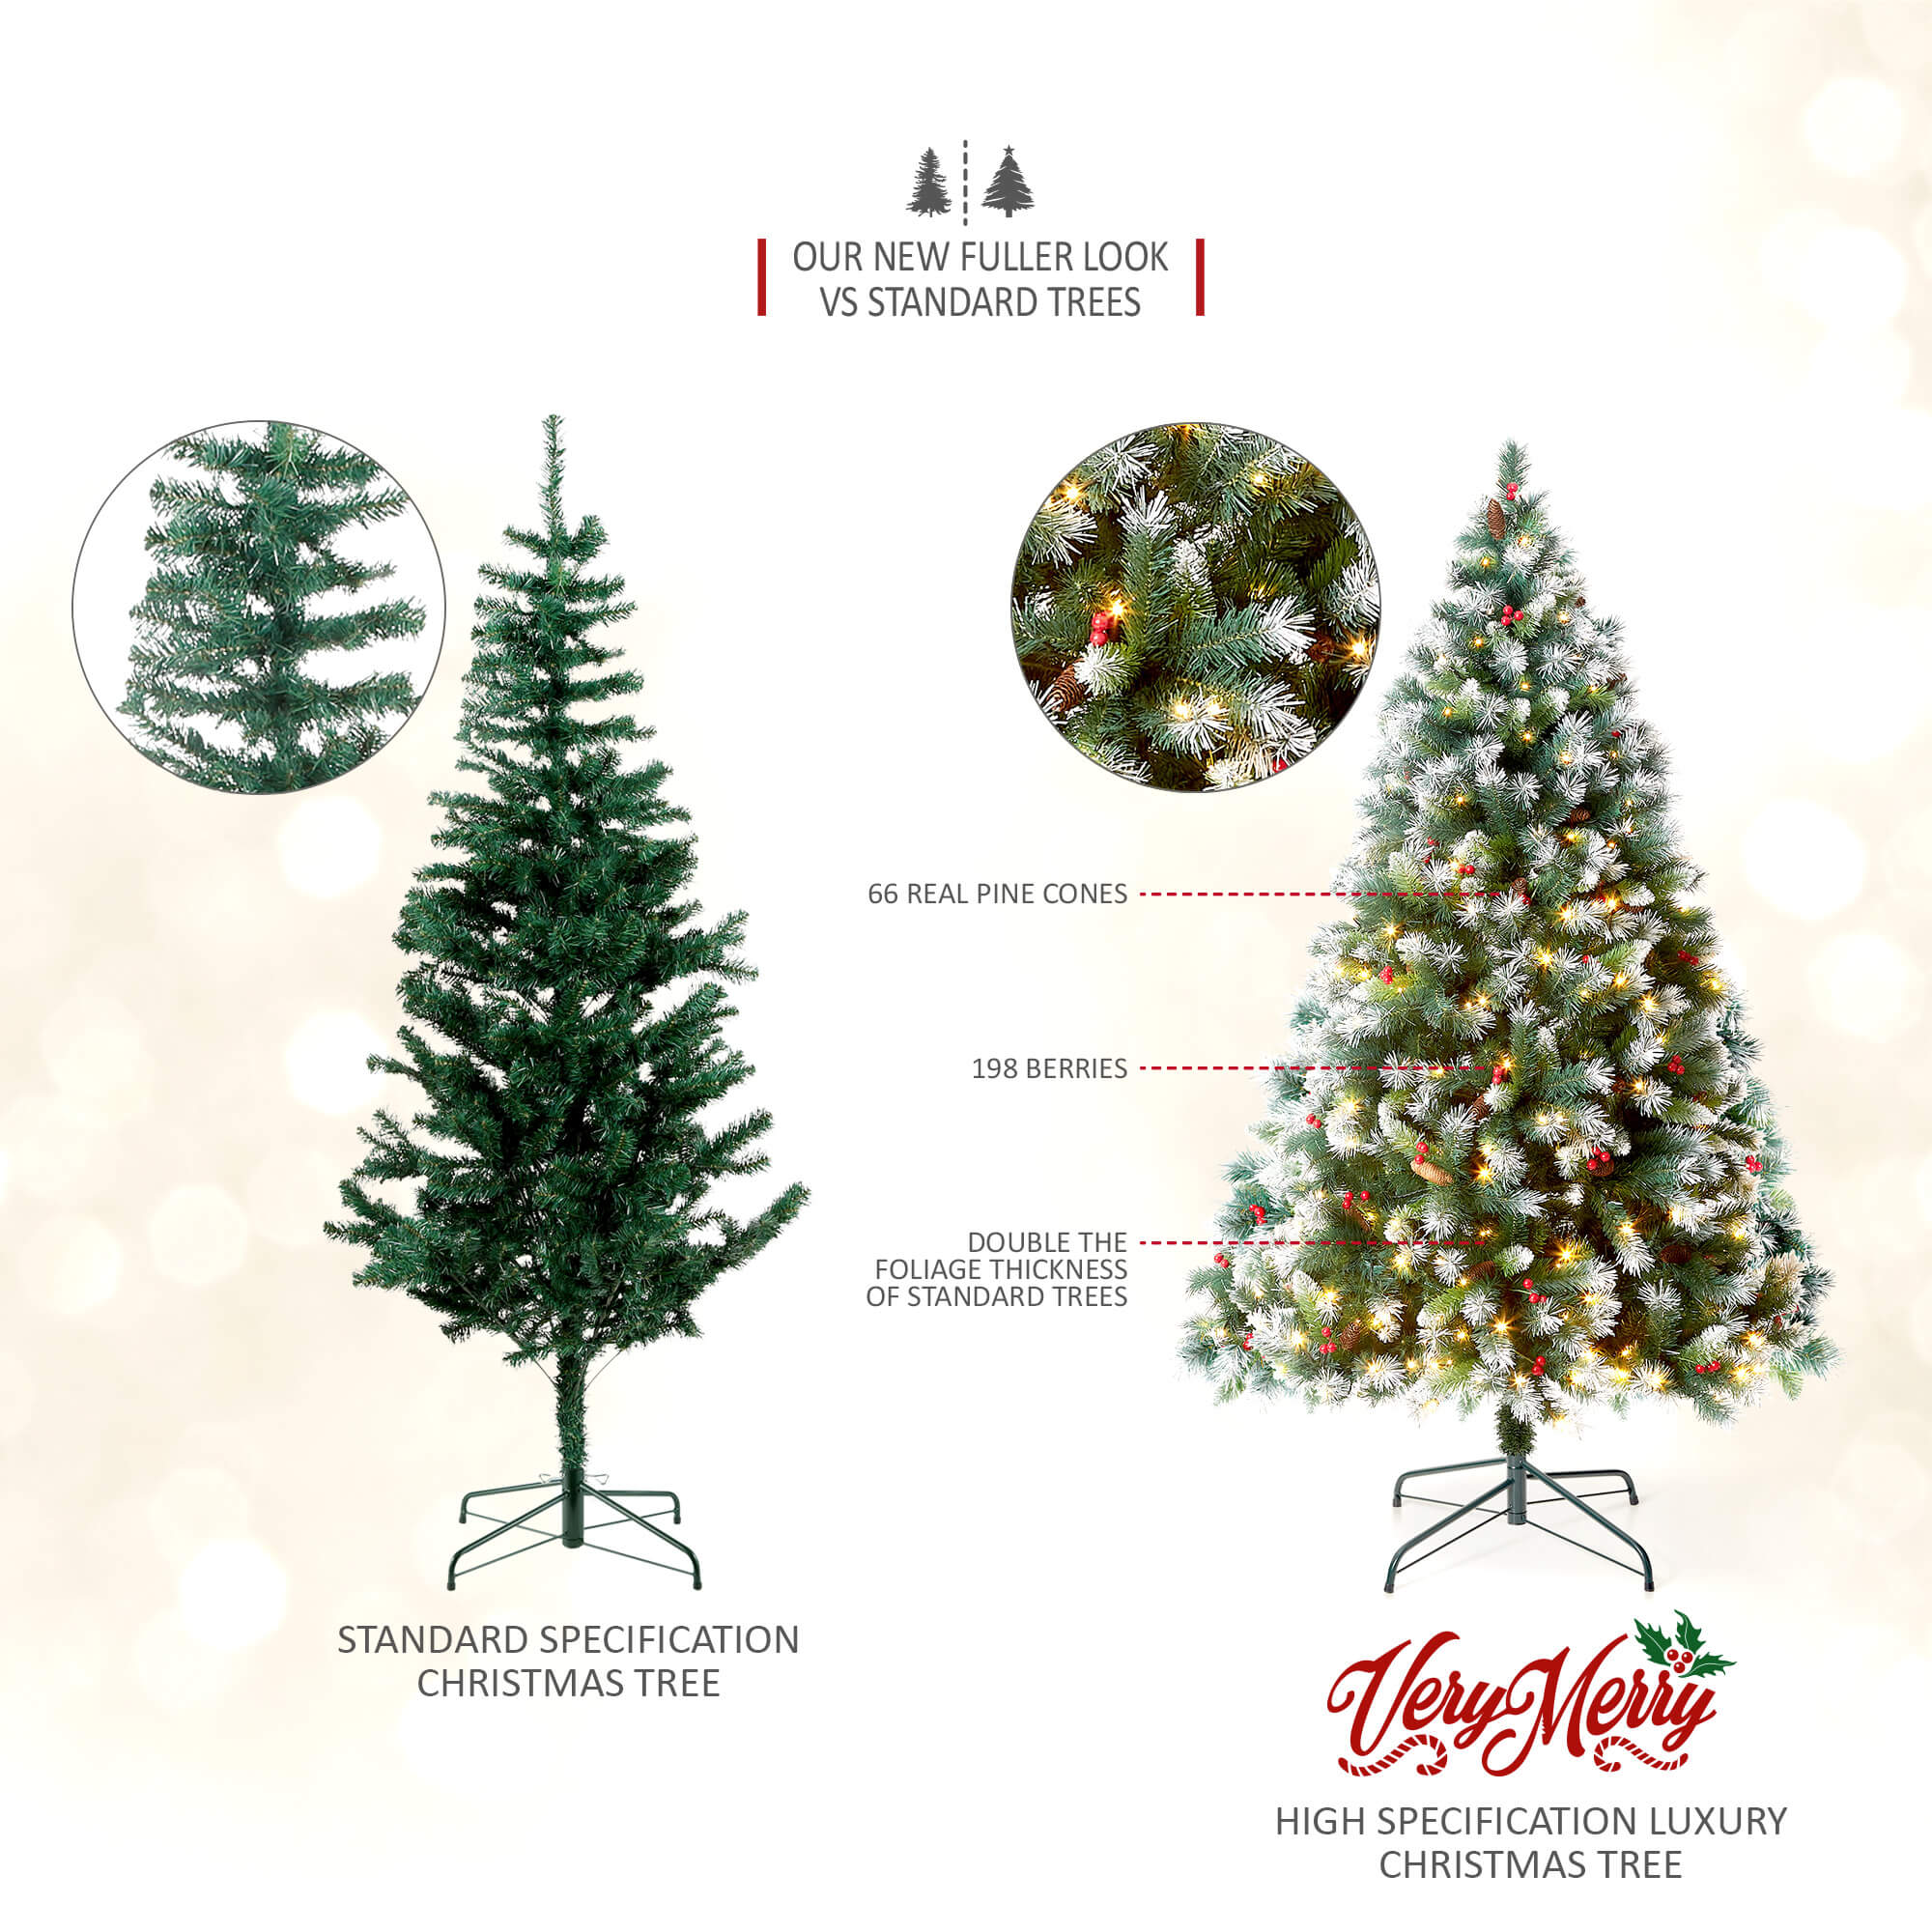 VeryMerry 7FT 'Claudia' Pre-Lit Christmas Tree with 400 Built-In Warm White LED Lights with Auto-Off Timer, 8 Lighting Modes, Decorative Pinecones and Berries